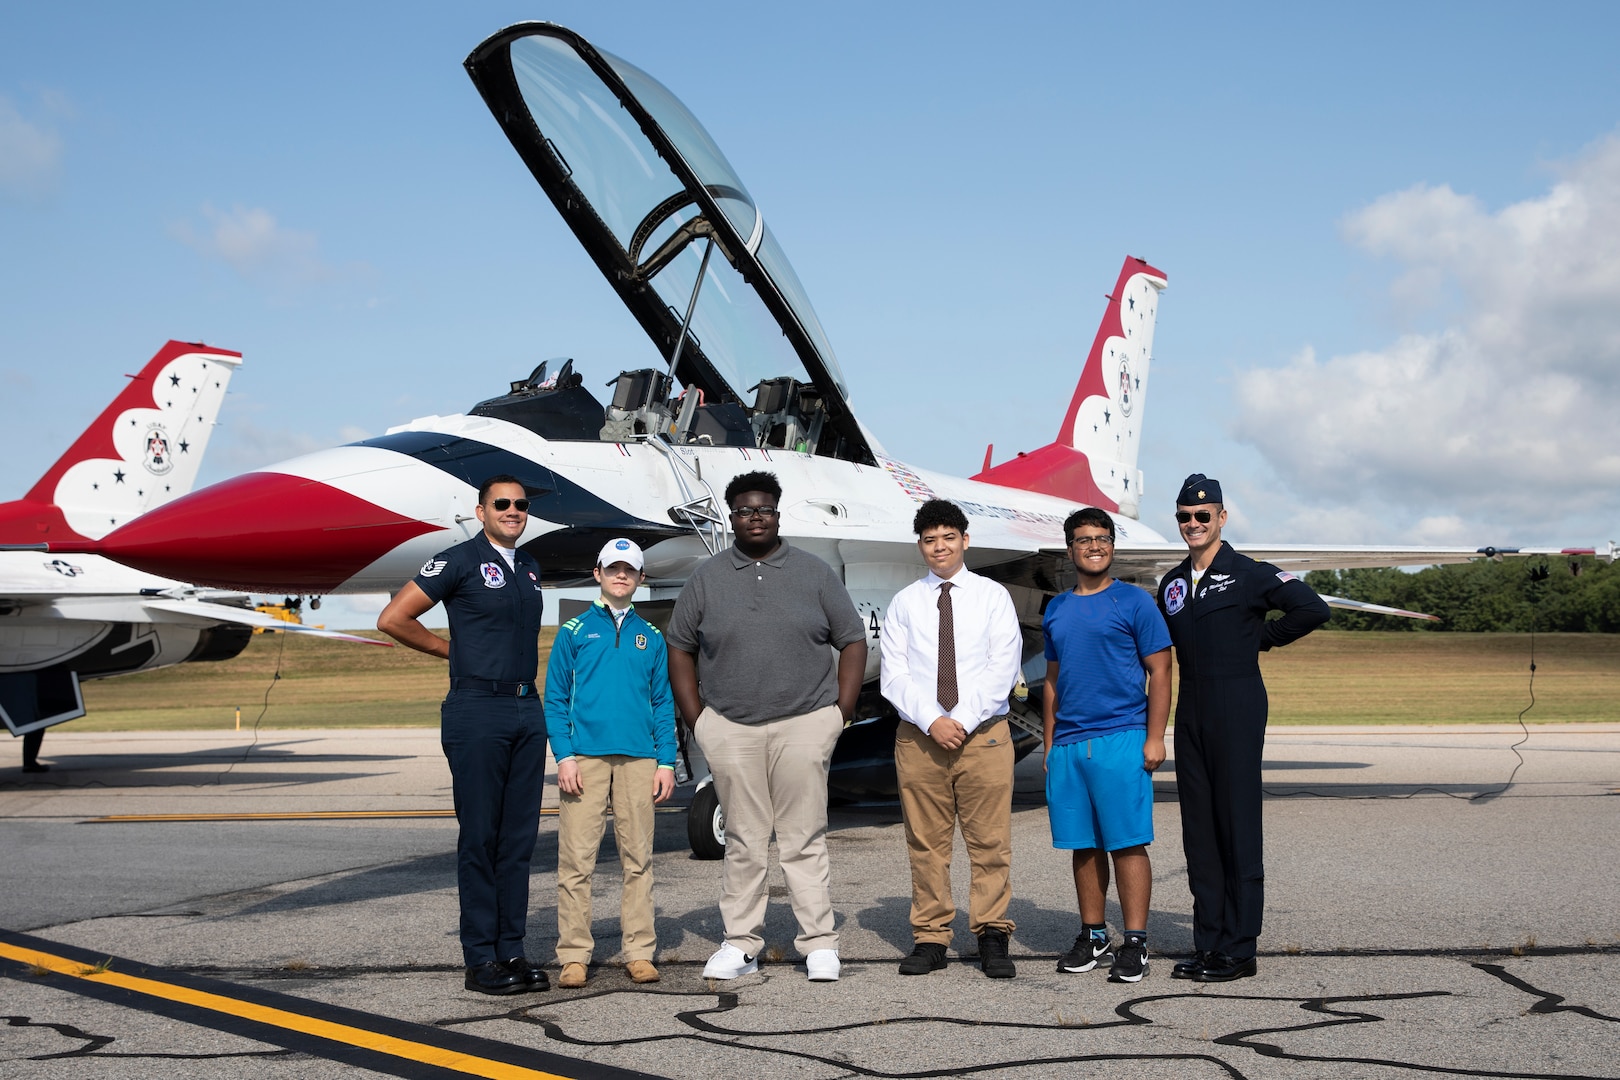 (From left to right) Tech Sgt. Peter Rivera, United States Air Force Air Demonstration Squadron "Thunderbirds”, Zachory Durham, Tyler Harris, James Connolly, Max Saravia, and Maj. Michael Brewer, United States Air Force Air Demonstration Squadron "Thunderbirds”, pose for a photo at the 2021 Thunder Over New Hampshire Airshow Open House on Pease Air National Guard Base, Portsmouth, New Hampshire, Sept. 10, 2021. Brewer and Rivera gave a tour of their F-16 Fighting Falcon to a small group of people before starting their aerial performance show. (U.S. Army National Guard photo by Devin Bard)